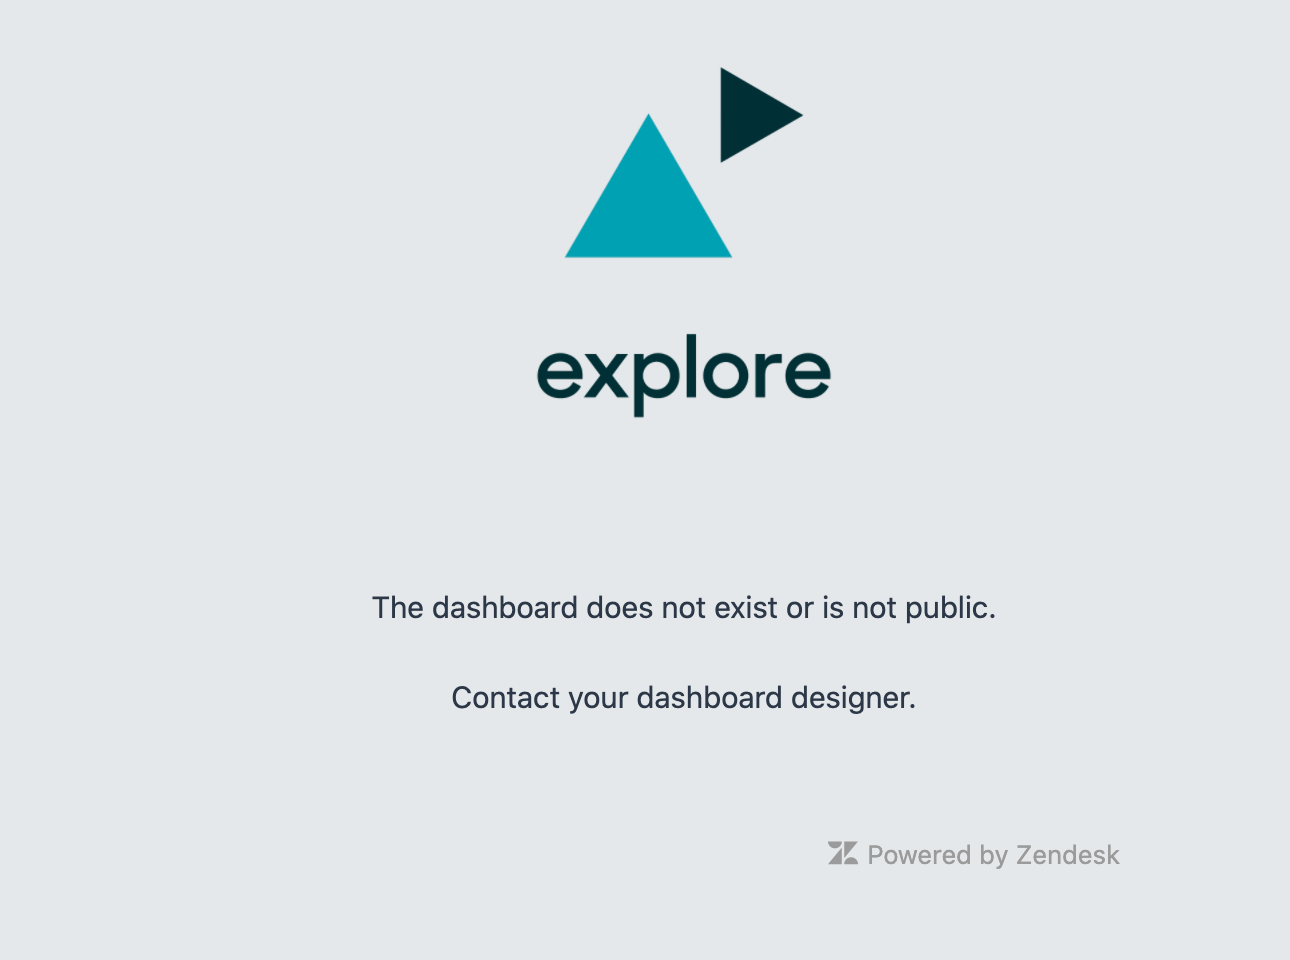 Explore error message- The Dashboard does not exist or is not public. Contact your dashboard designer